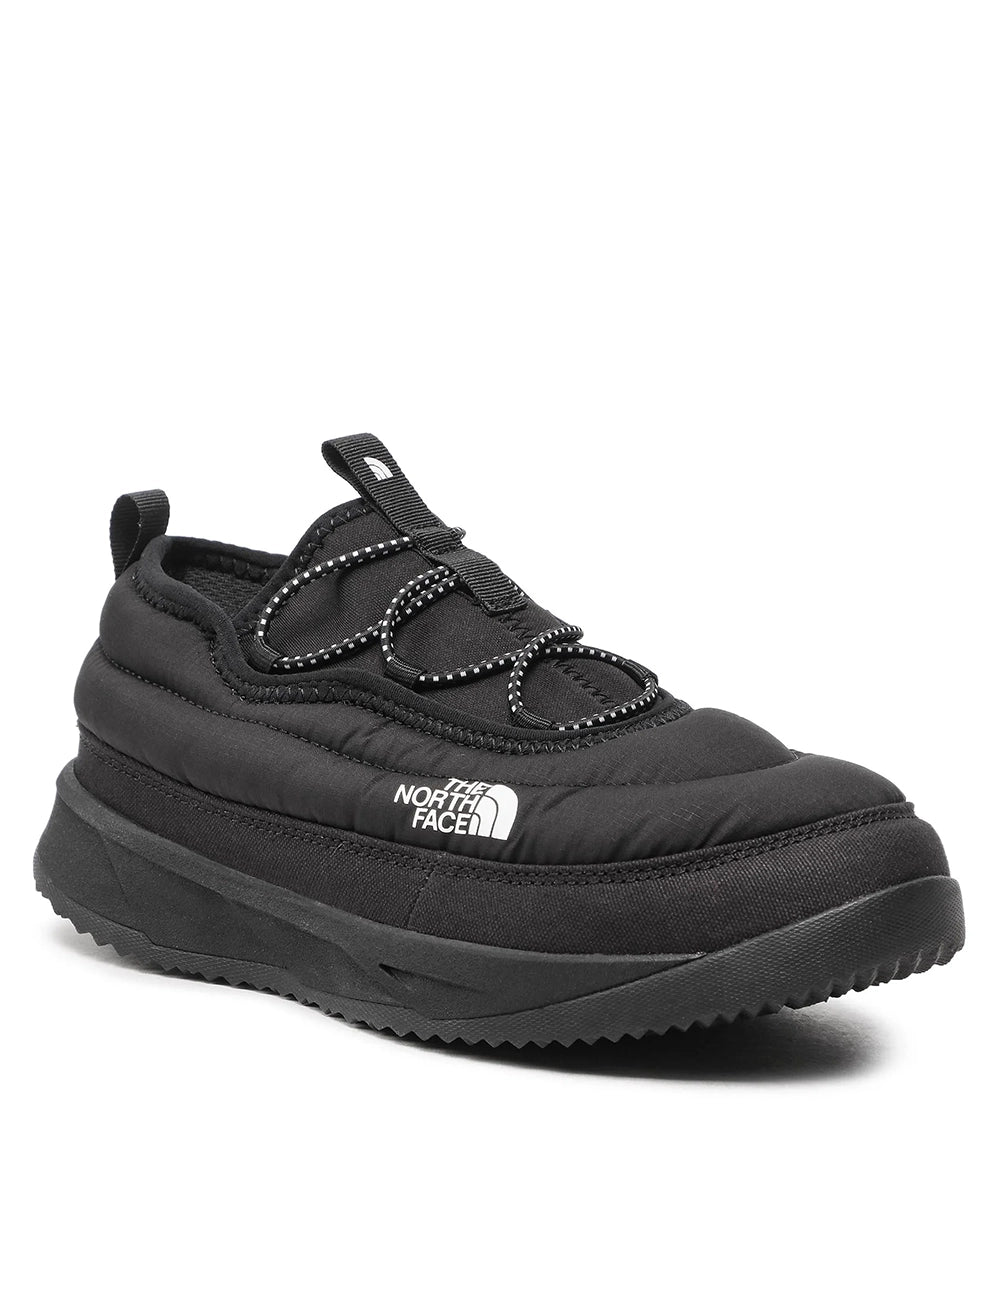 THE NORTHFACE WOMEN'S NSE LOW